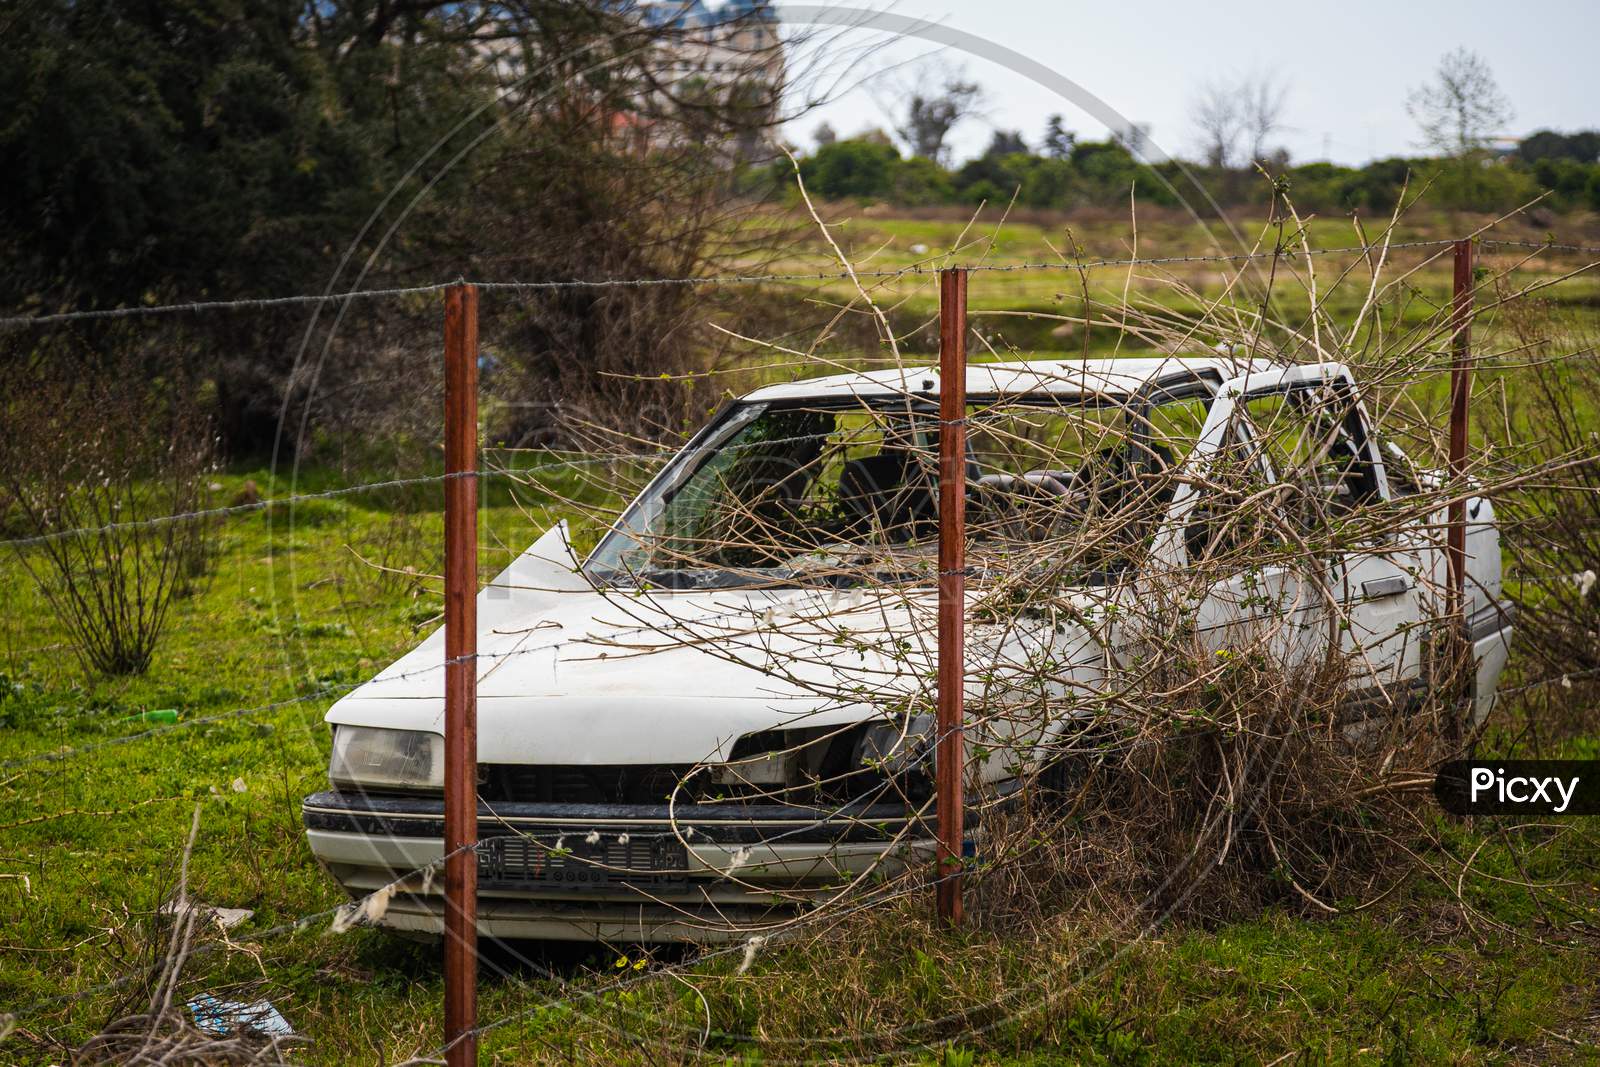 An Old Abandoned White Car Sedan With A Broken Roof, Broken Glass, Flat Wheels, Through Which Trees And Grass Have Sprouted Against The Background Of A Field